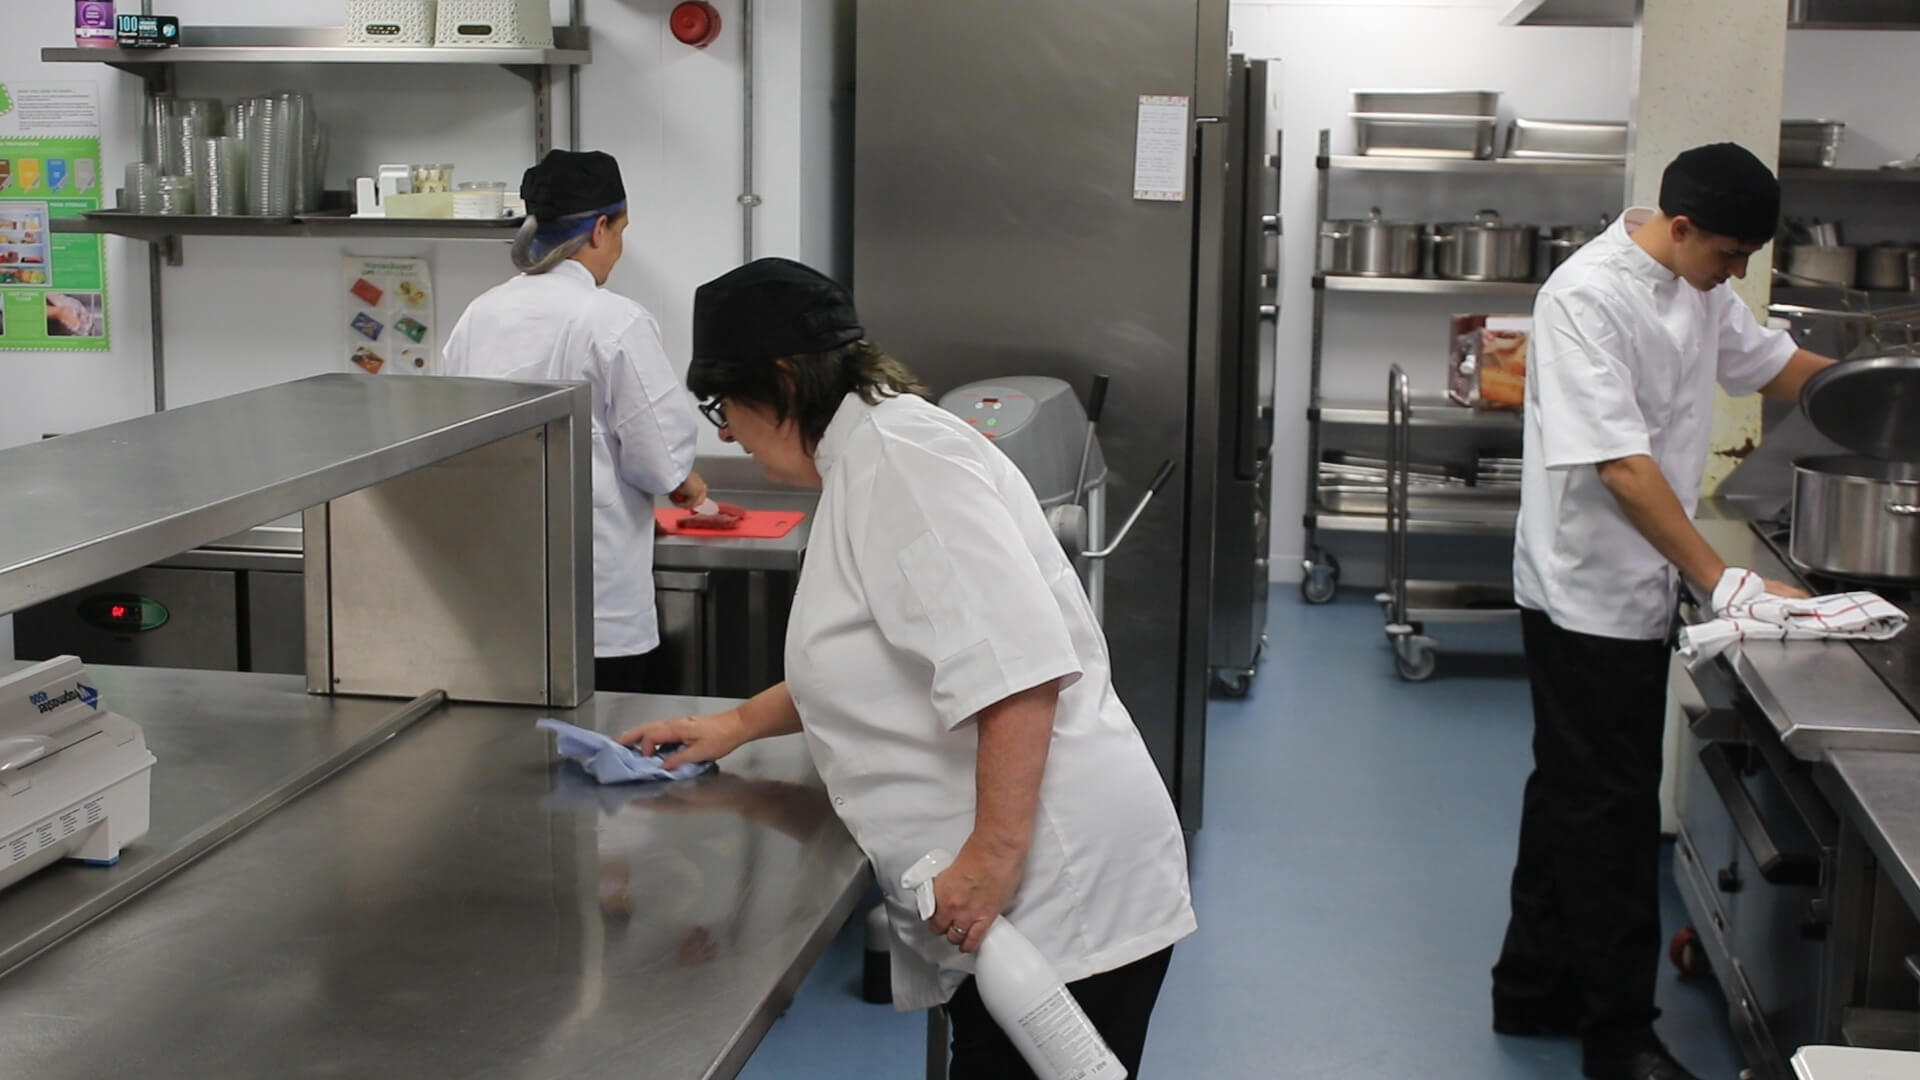 Staff in a kitchen putting into practice what they learned in their level 2 Food Safety and Hygiene course